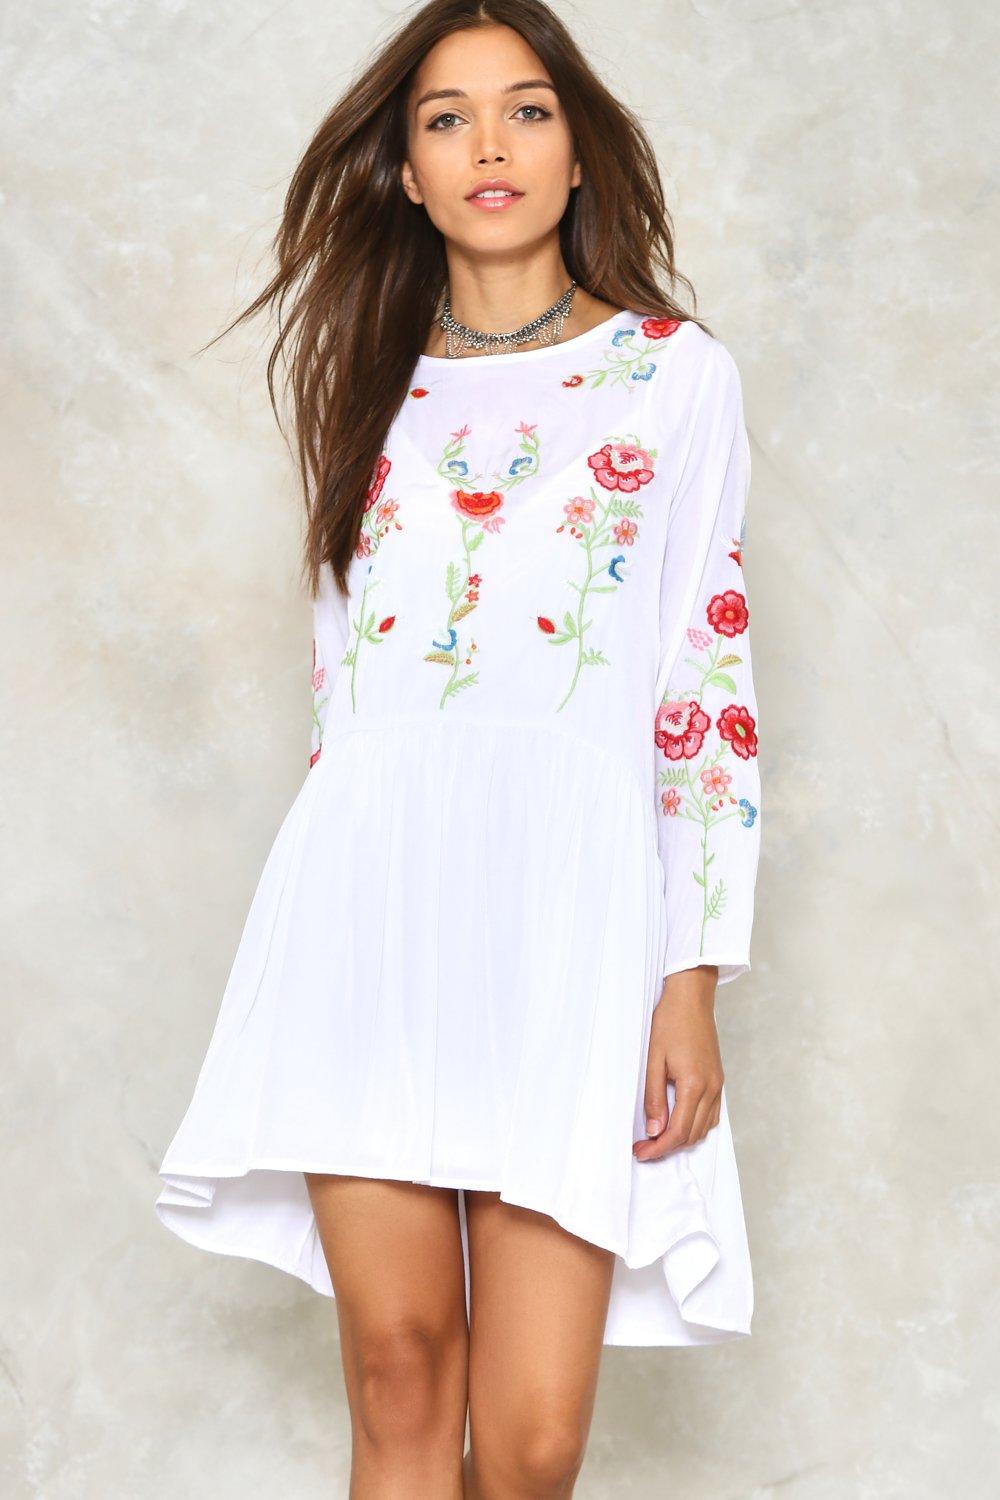 White Dress With Embroidered Flowers ...